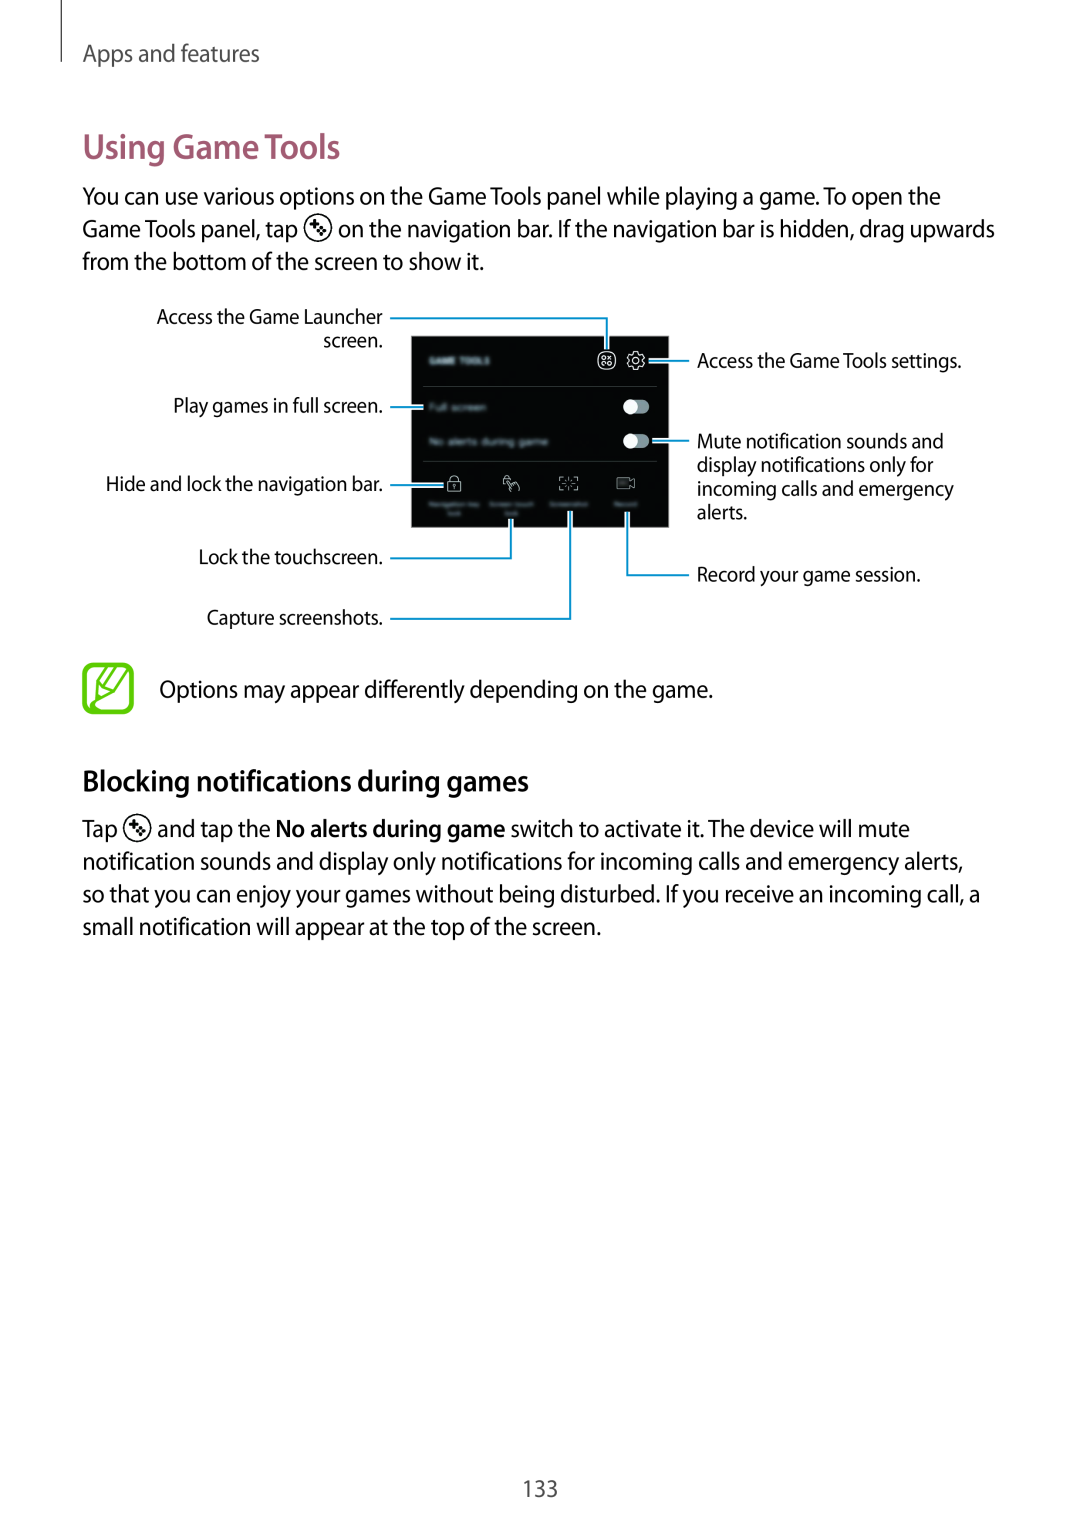 Samsung SM-A530FZVAFTM, SM-A530FZDDXEF manual Using Game Tools, Blocking notifications during games, Apps and features 